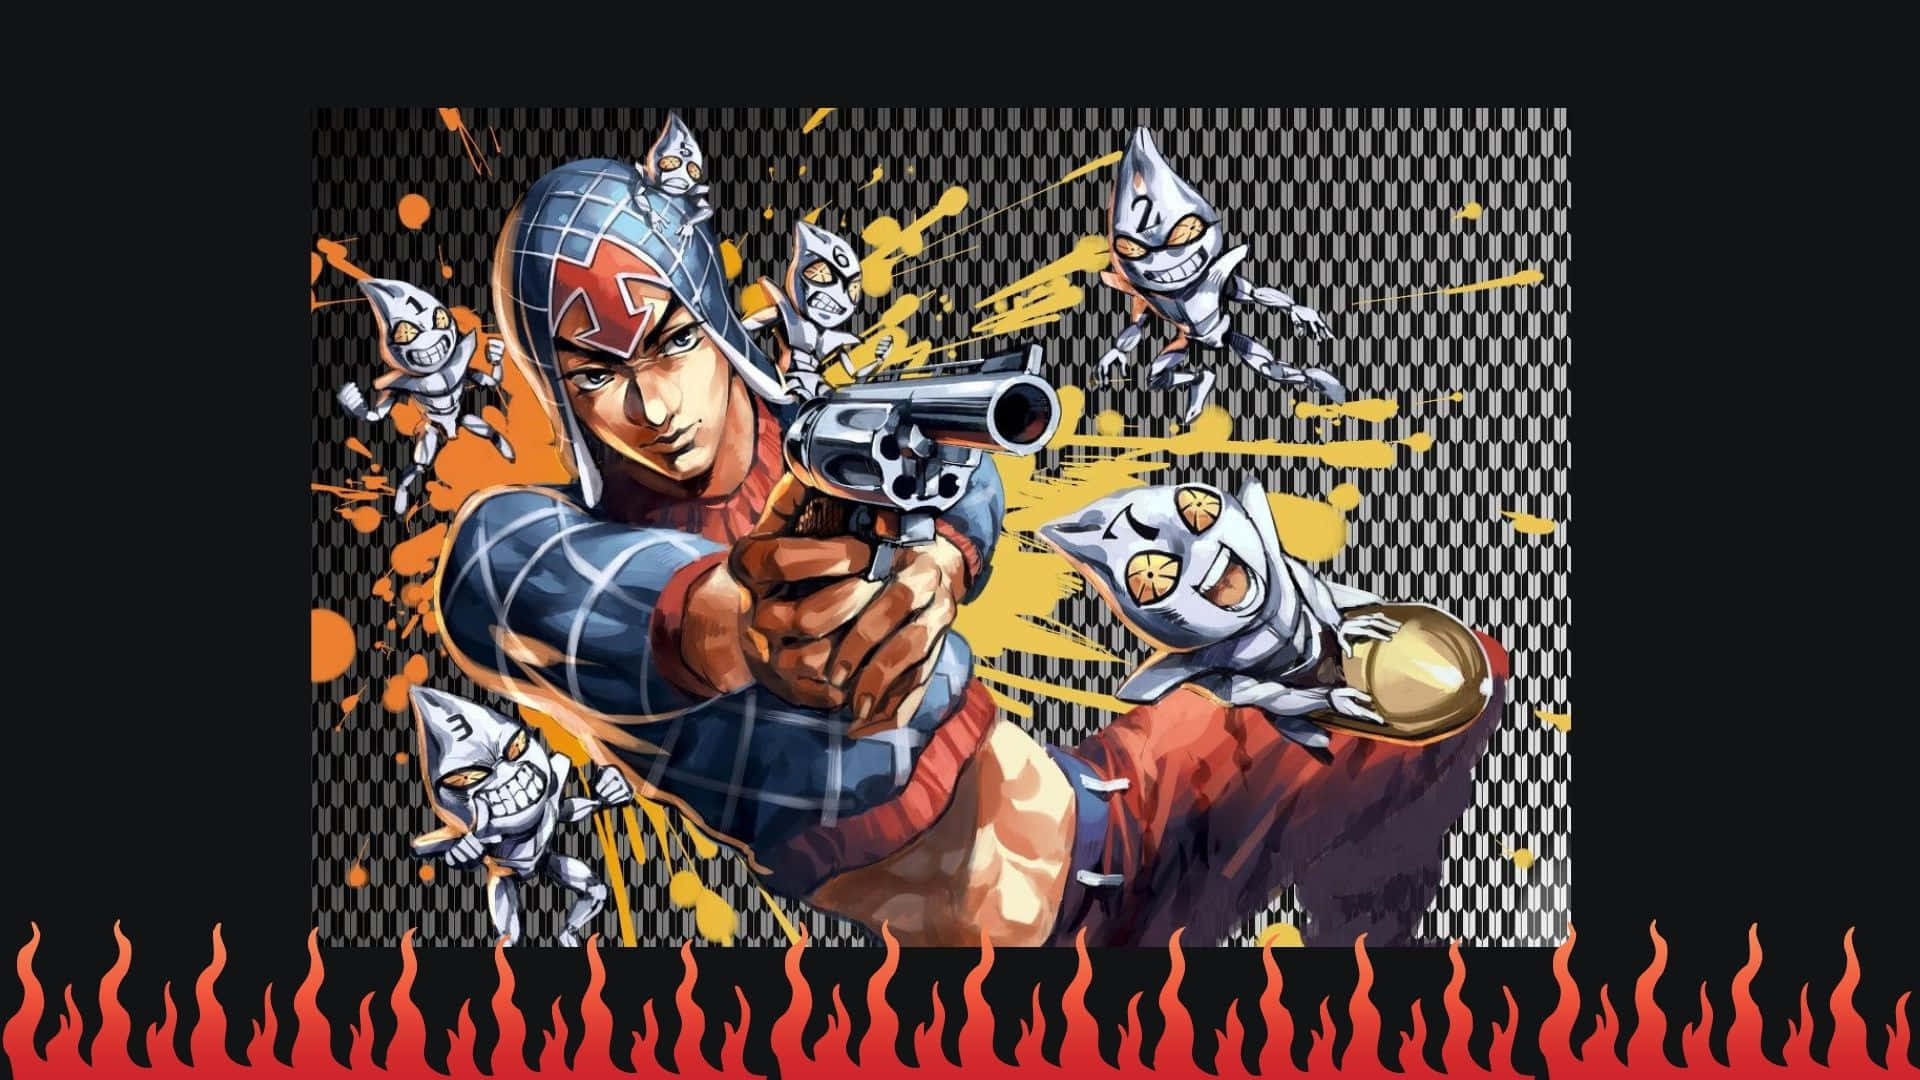 Guido Mista Poses with his Stand "Sex Pistols" Wallpaper